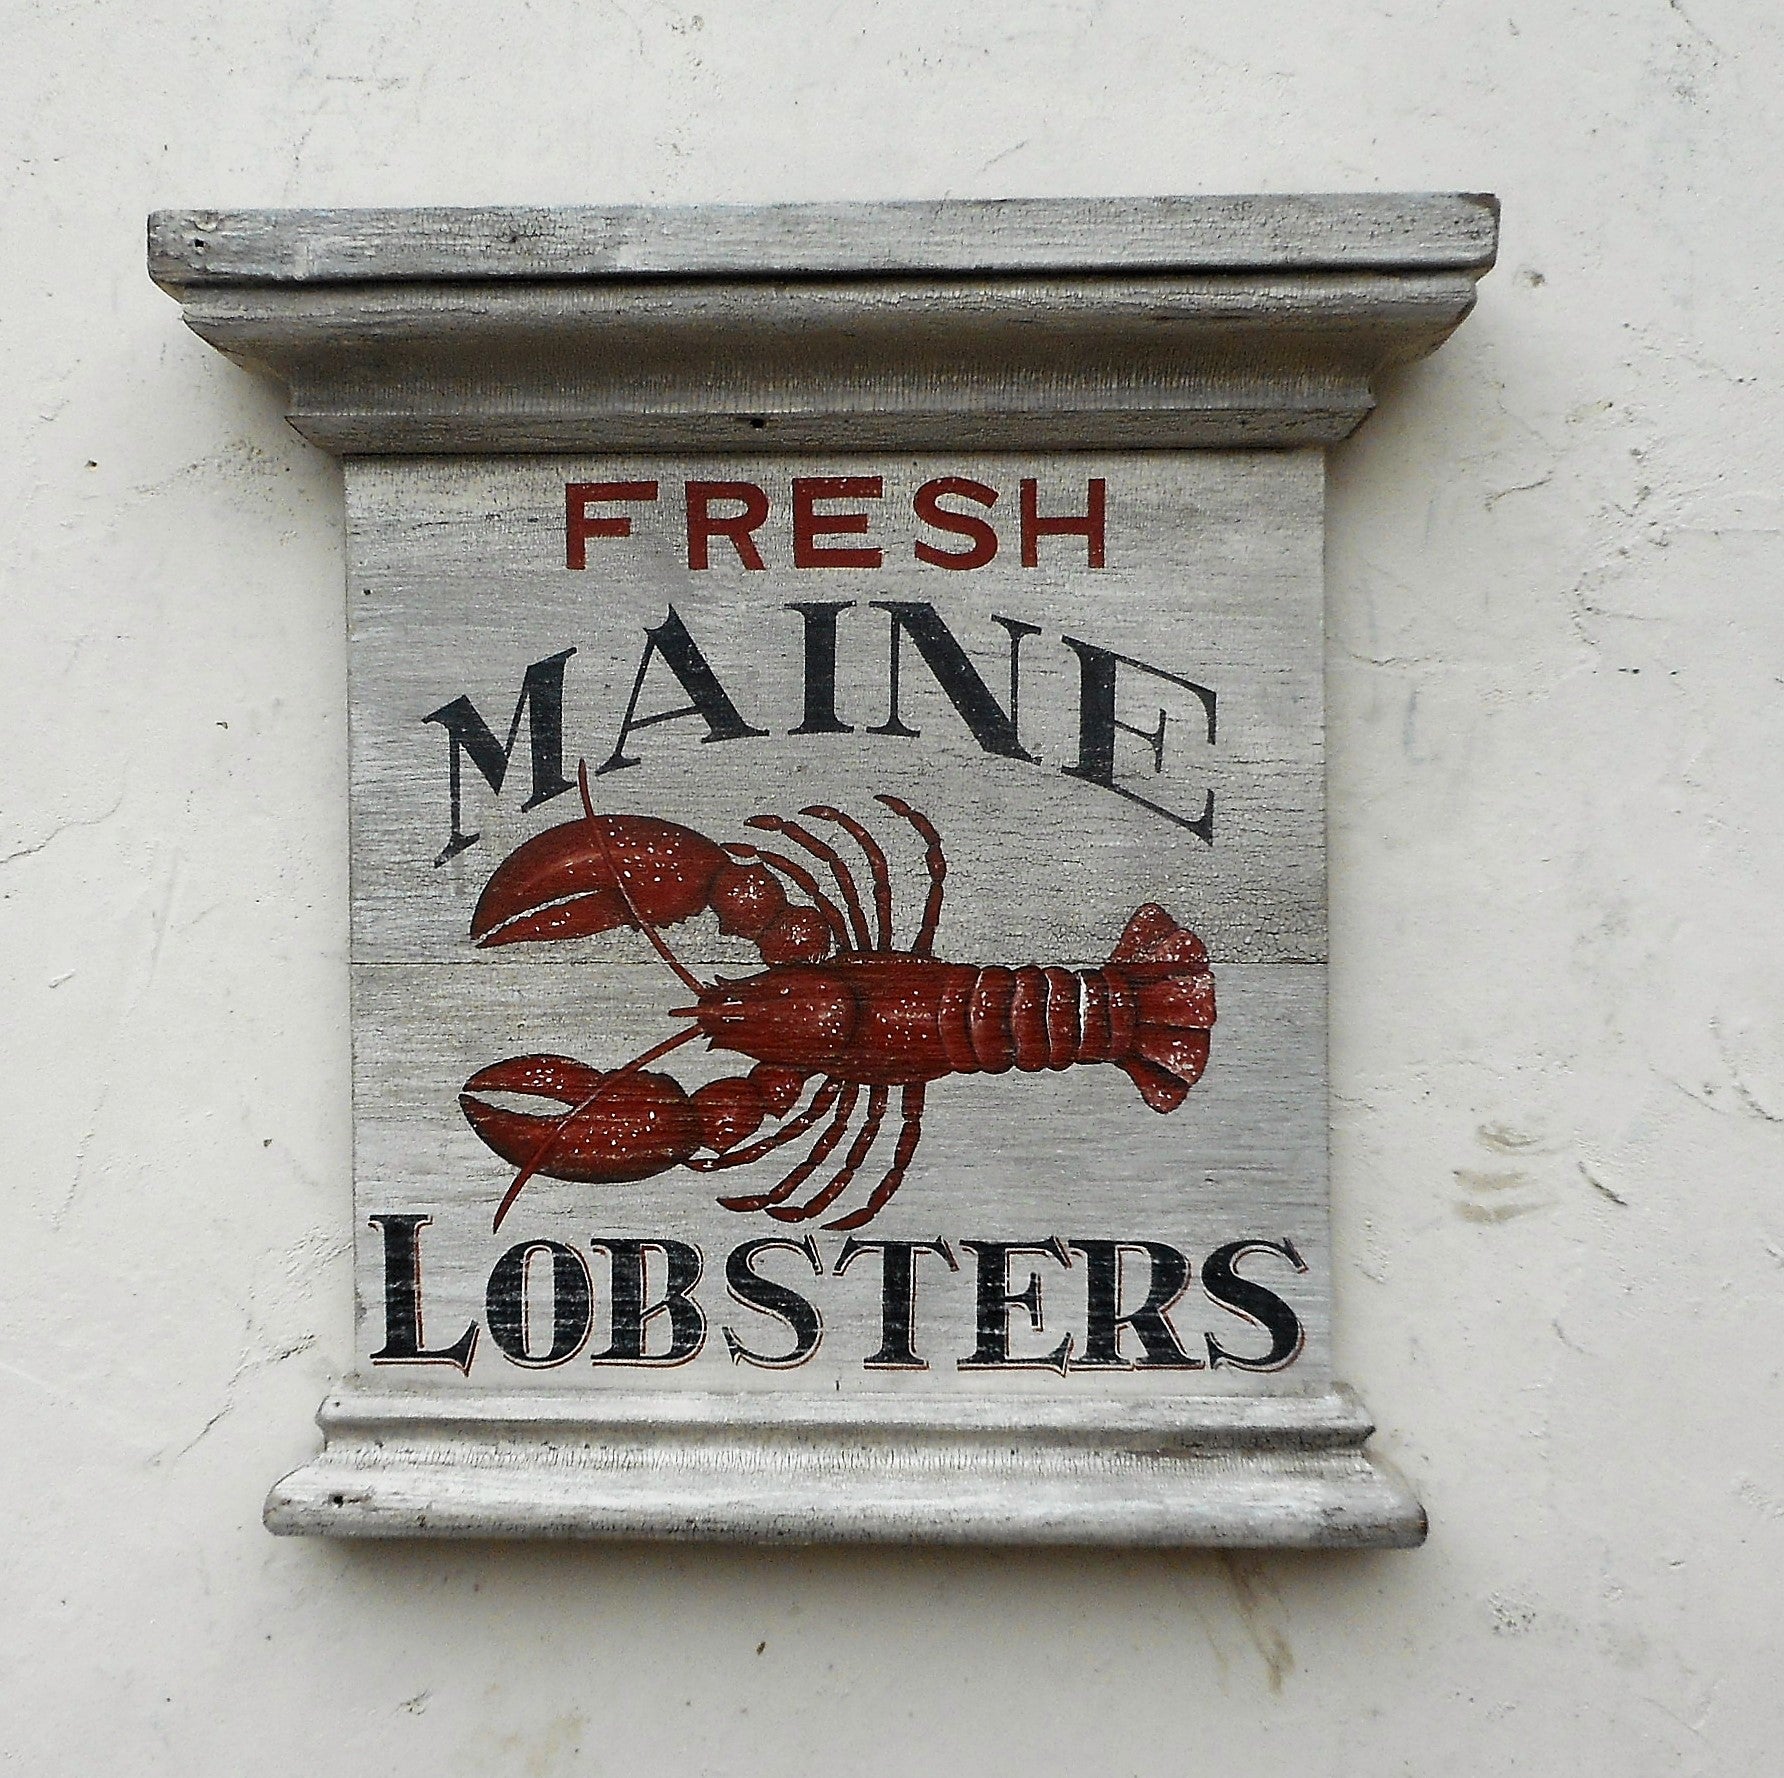 Fresh Maine Lobsters